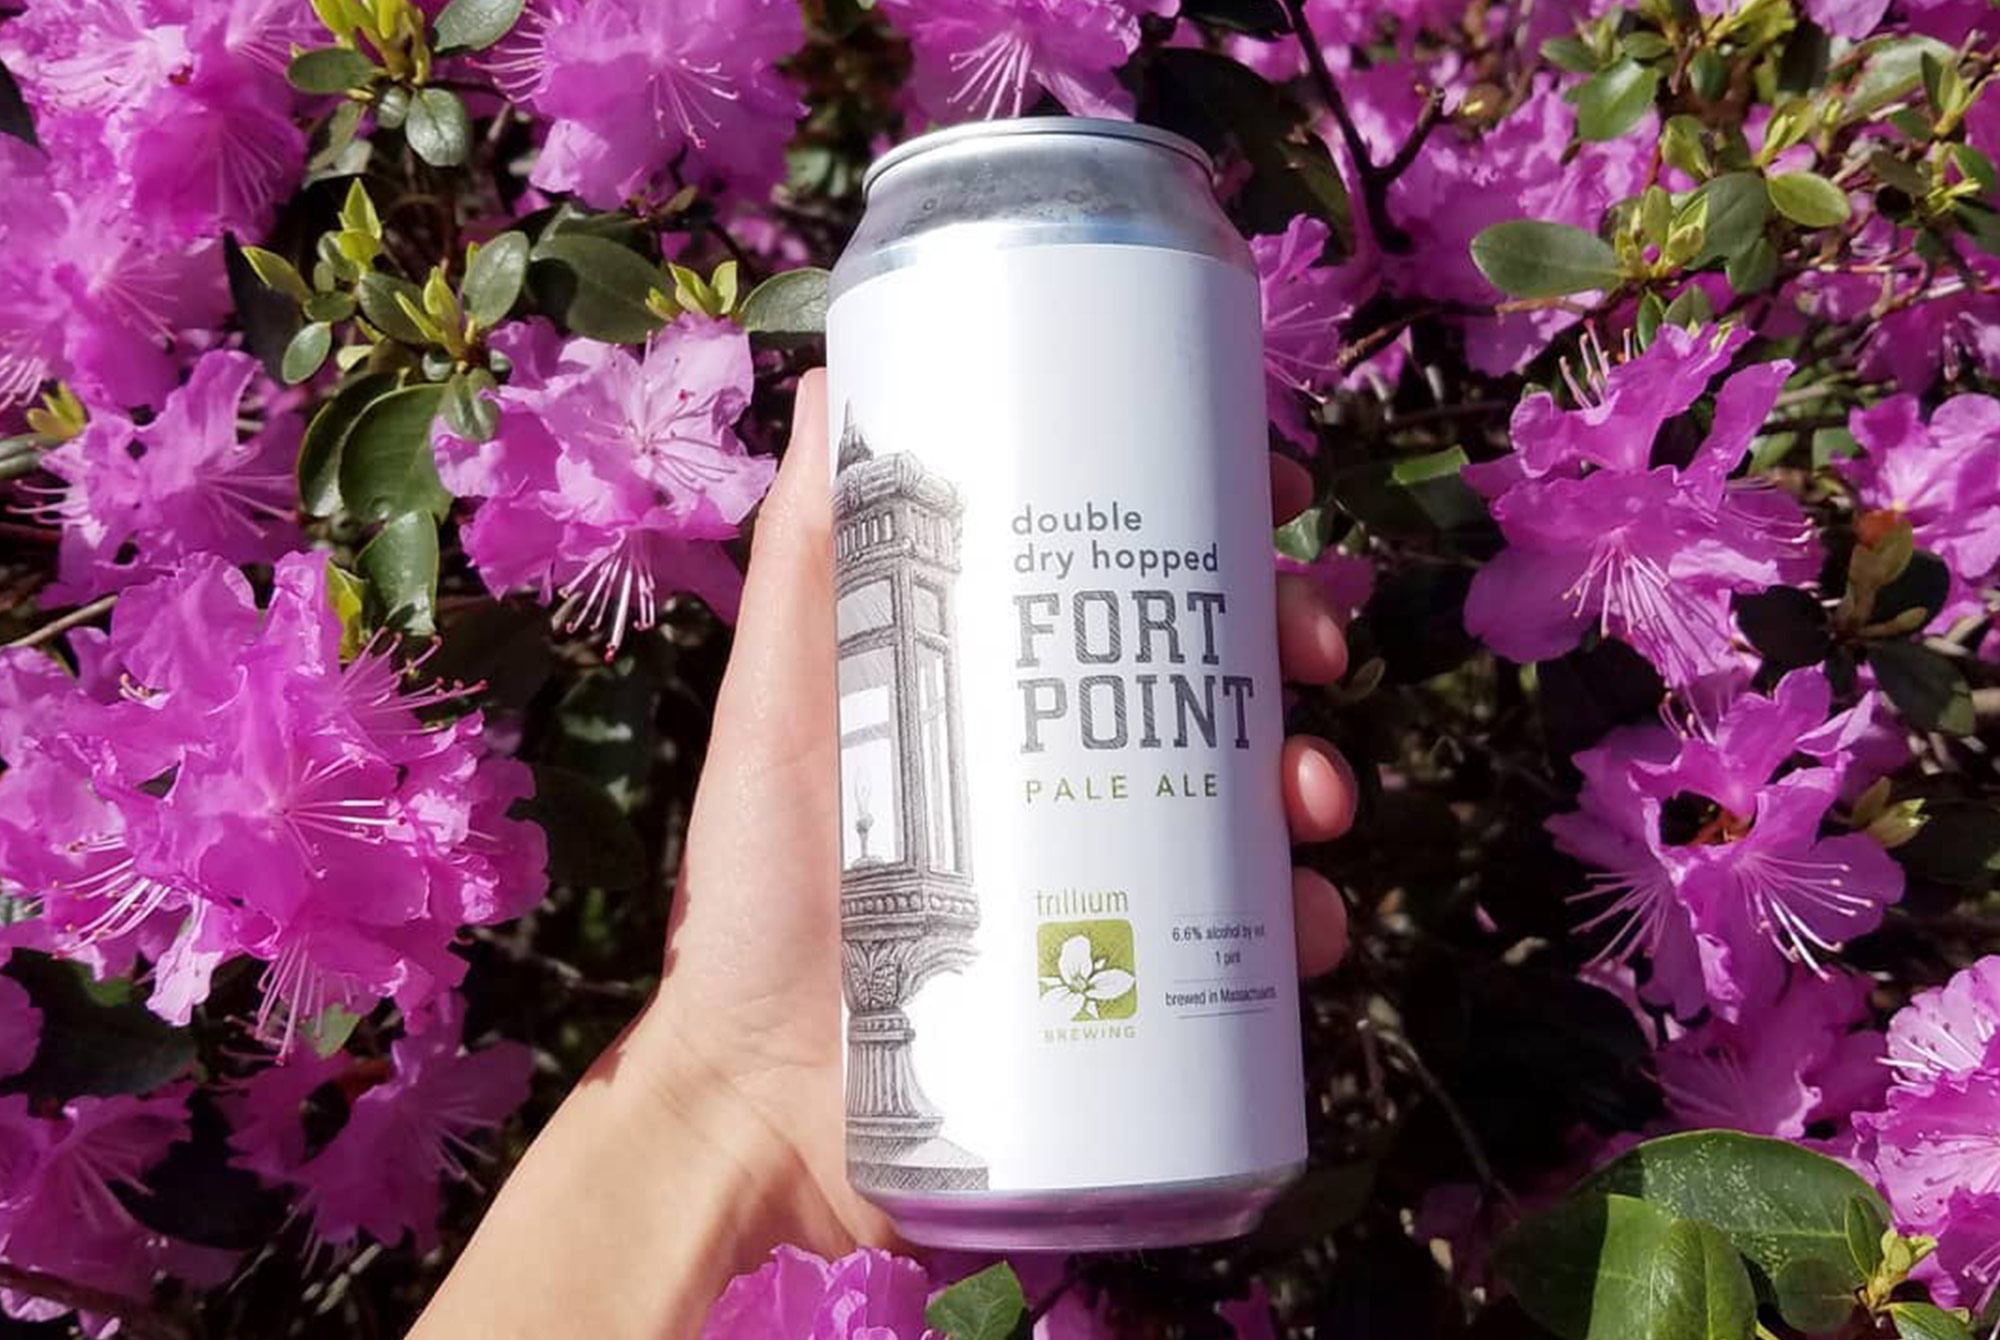 DDH Fort Point from Trillium, one of the best breweries in Boston